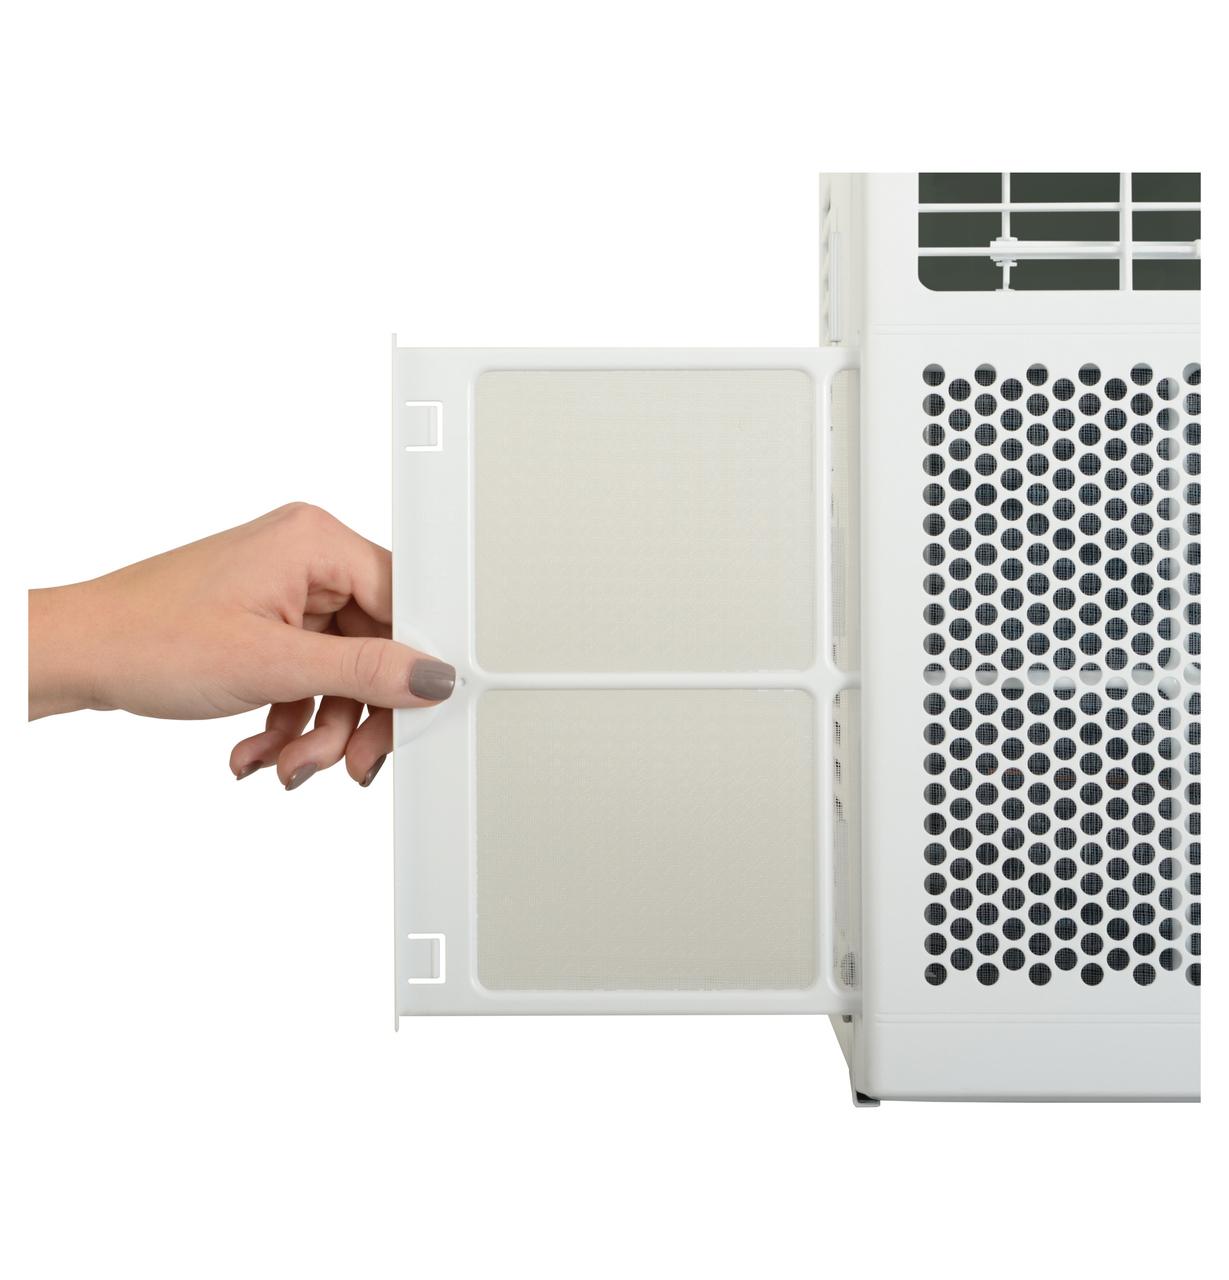 Haier QHEC05AC Haier 5,000 Btu Mechanical Window Air Conditioner For Small Rooms Up To 150 Sq Ft.